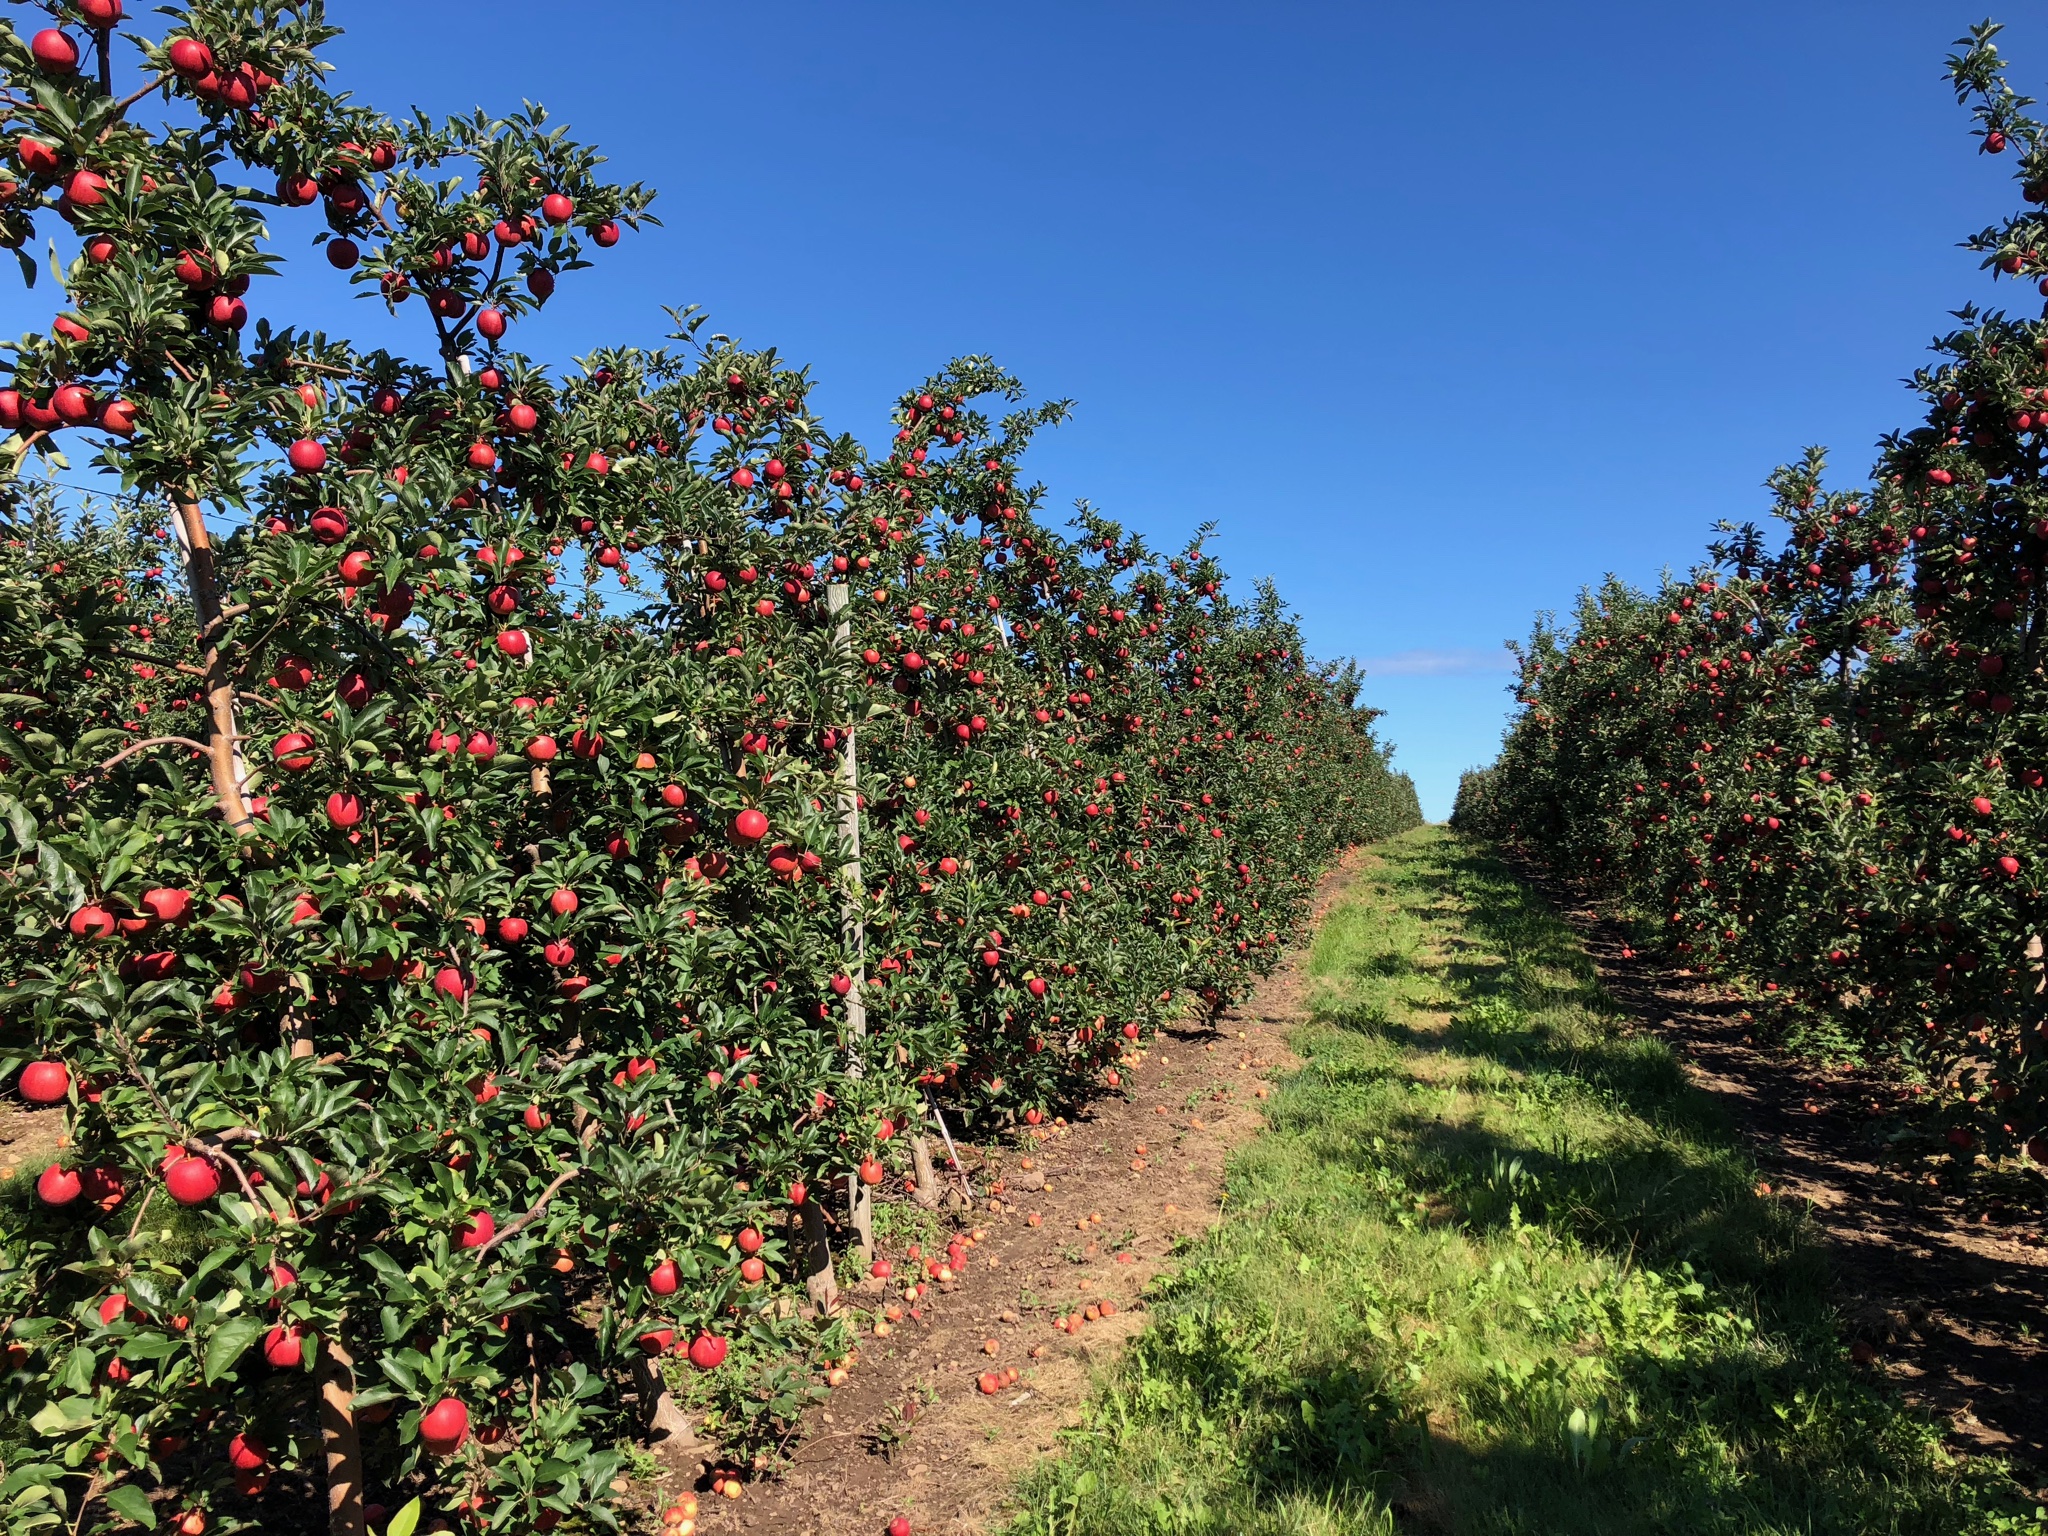 We grow more than 27+ apple varieties here at Abendroth's Apple Ridge Orchard